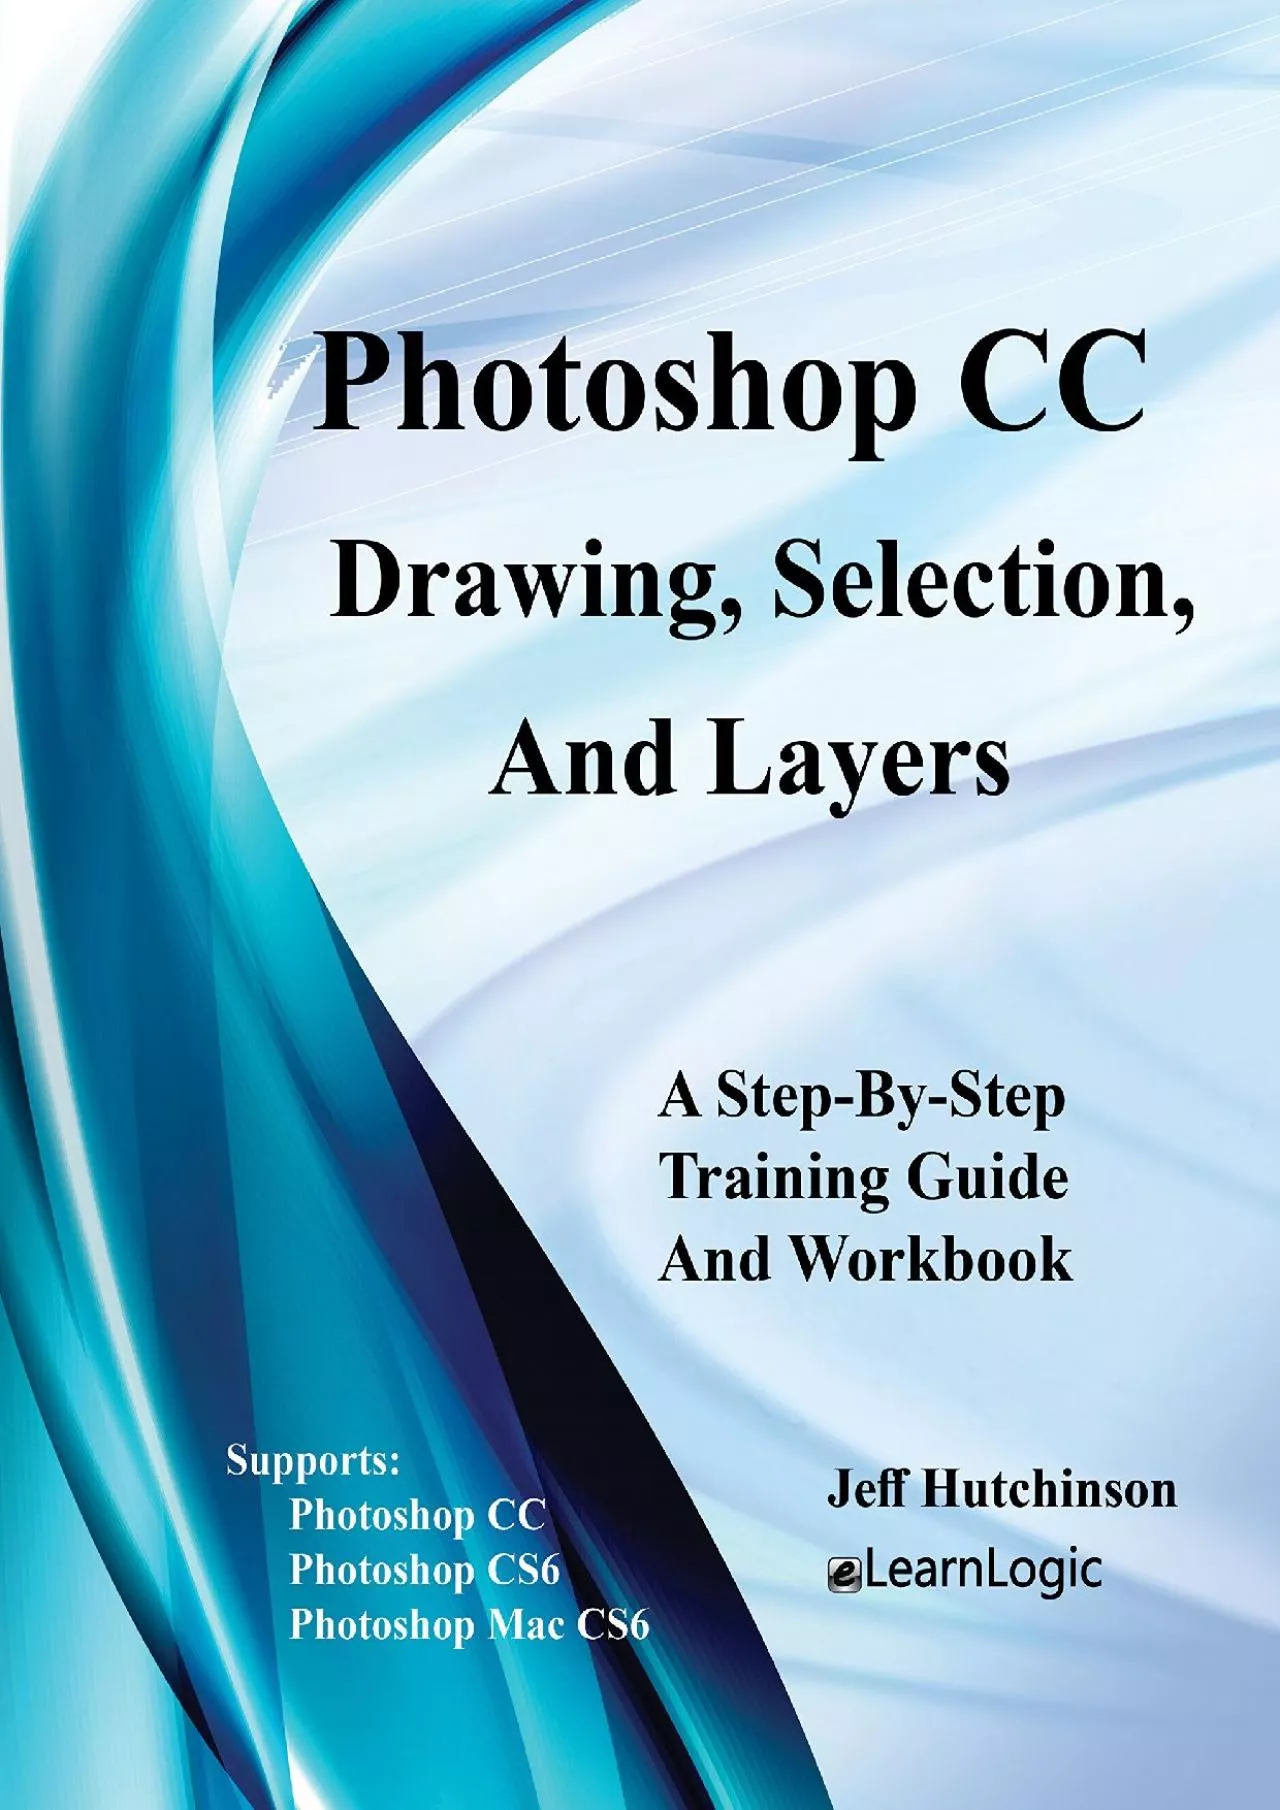 (READ)-Photoshop CC - Drawing, Selection, And Layers: Supports Photoshop CC, CS6, and